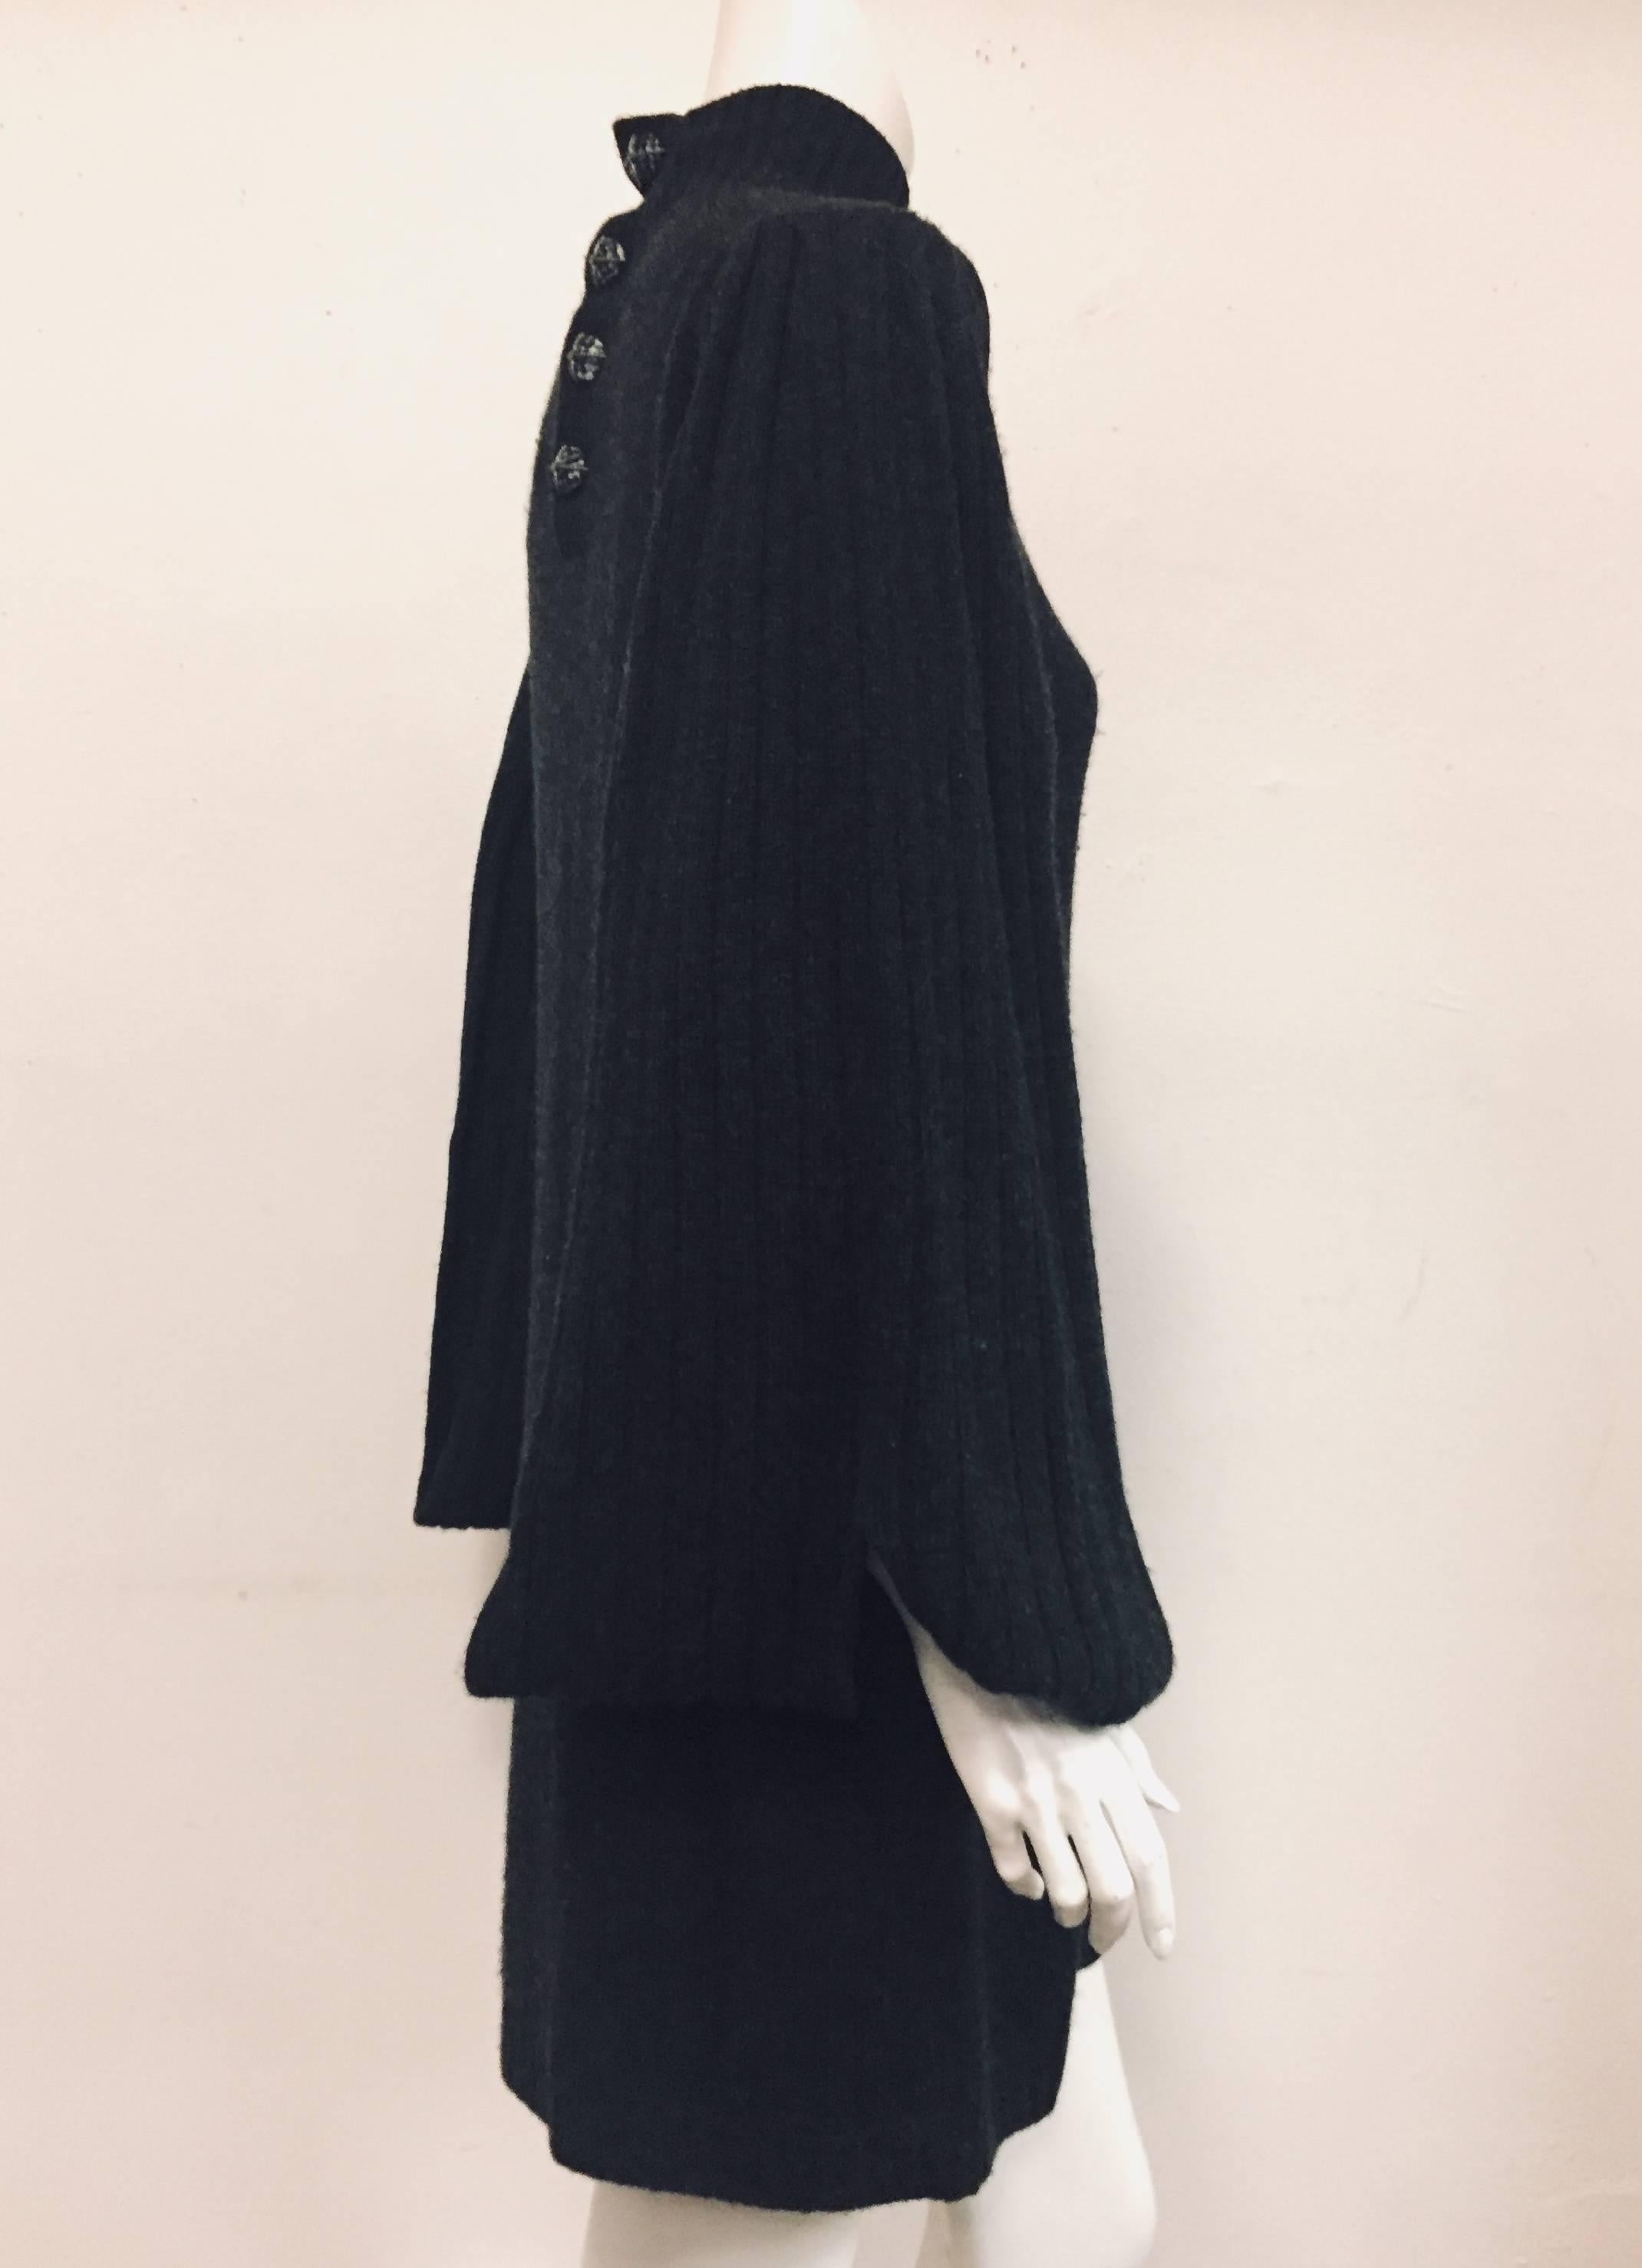 Charcoal color Chanel cashmere long sleeve sweater dress featuring ribbed knit stand collar and long open shawl sleeves.  This soft cashmere charcoal fitted sweater dress with drape style long sleeves is short enough that it can be, also, worn with